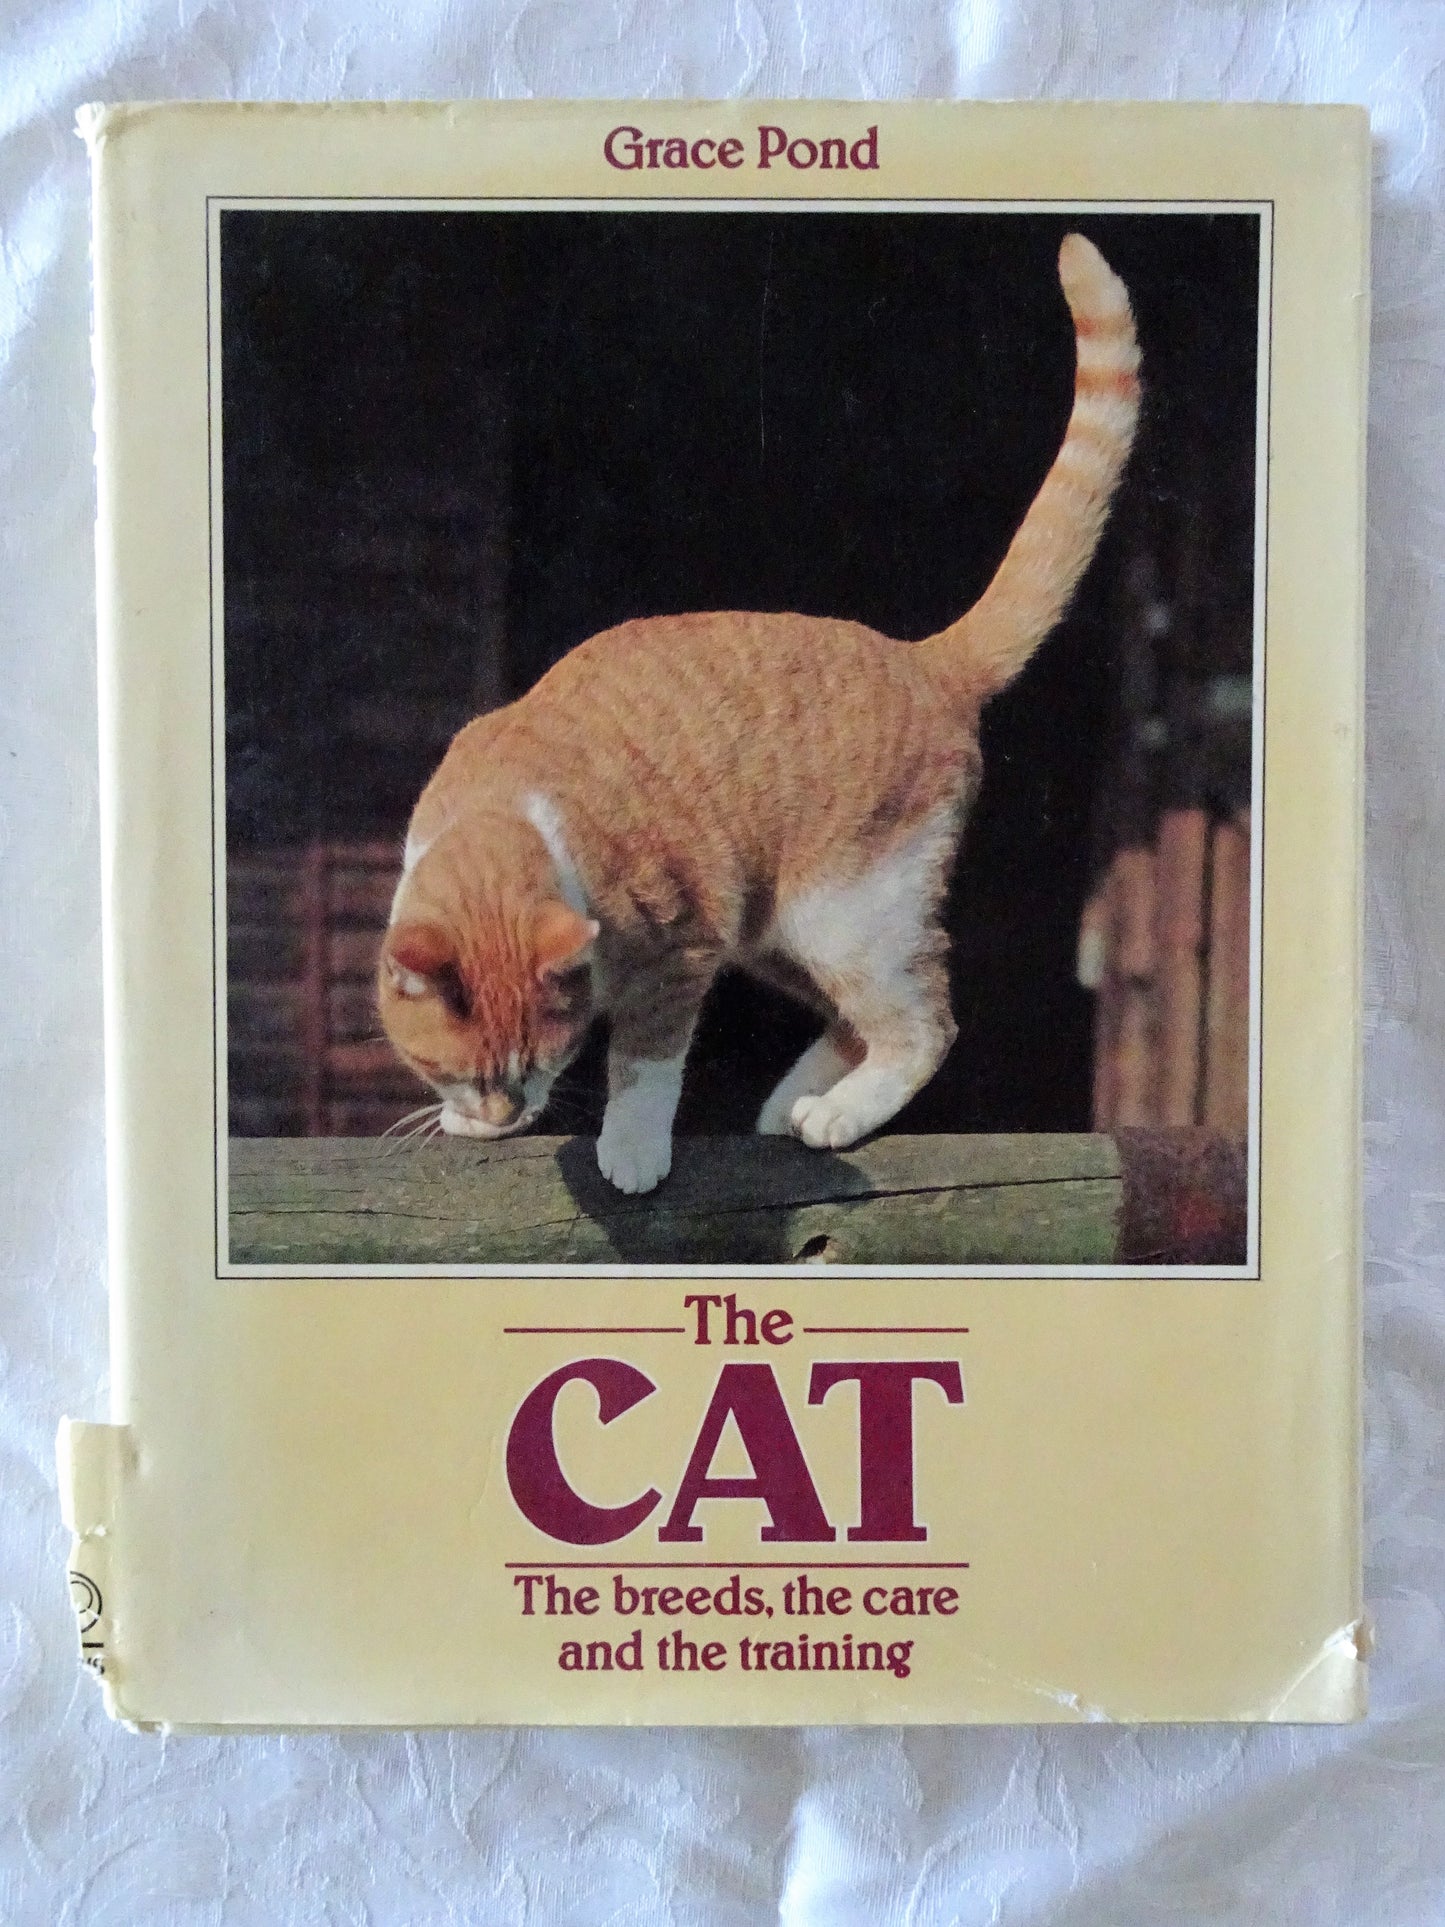 The Cat  The breeds, the care and the training  by Grace Pond